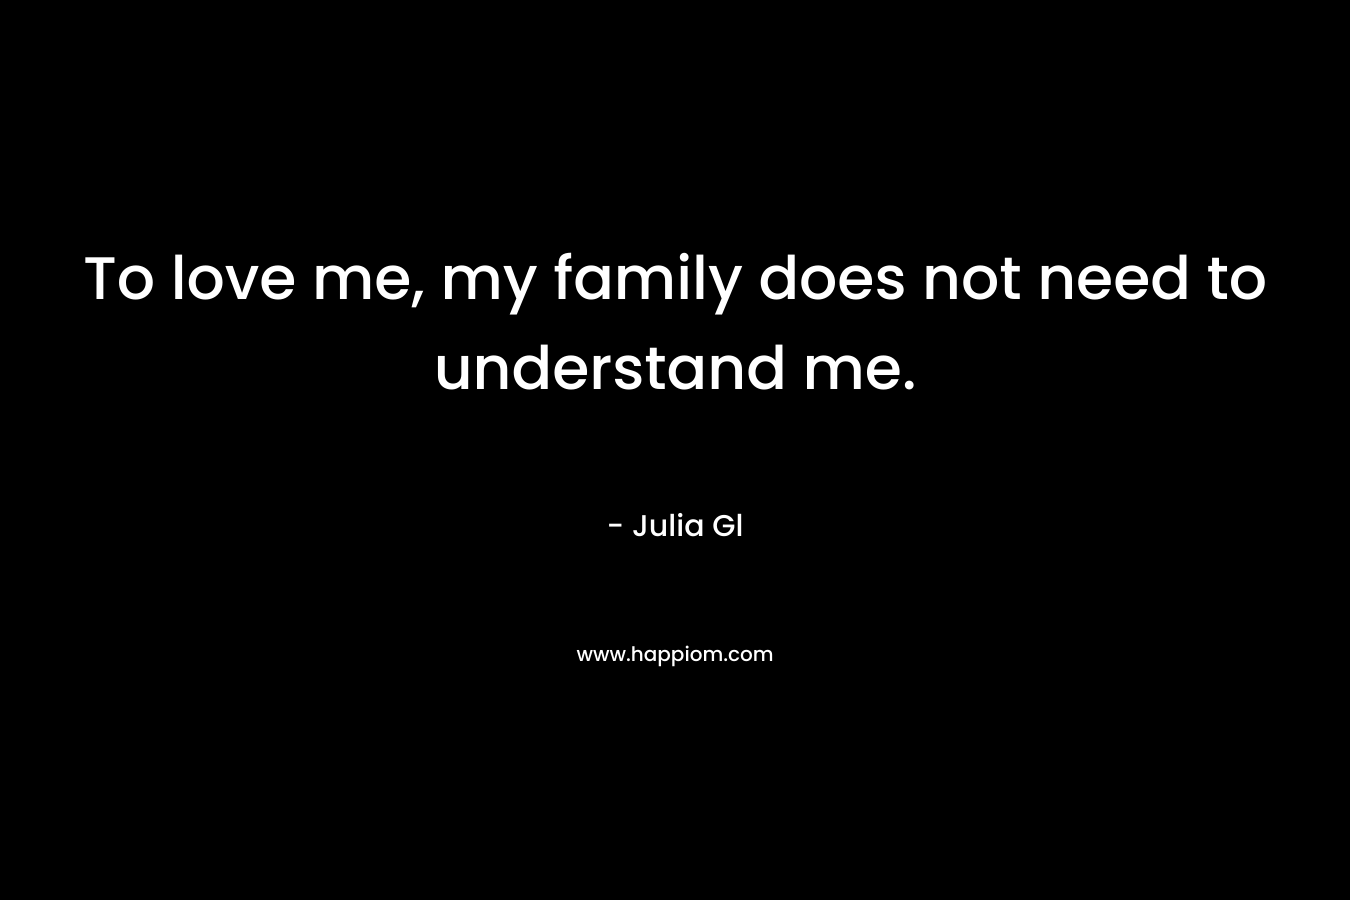 To love me, my family does not need to understand me. – Julia Gl